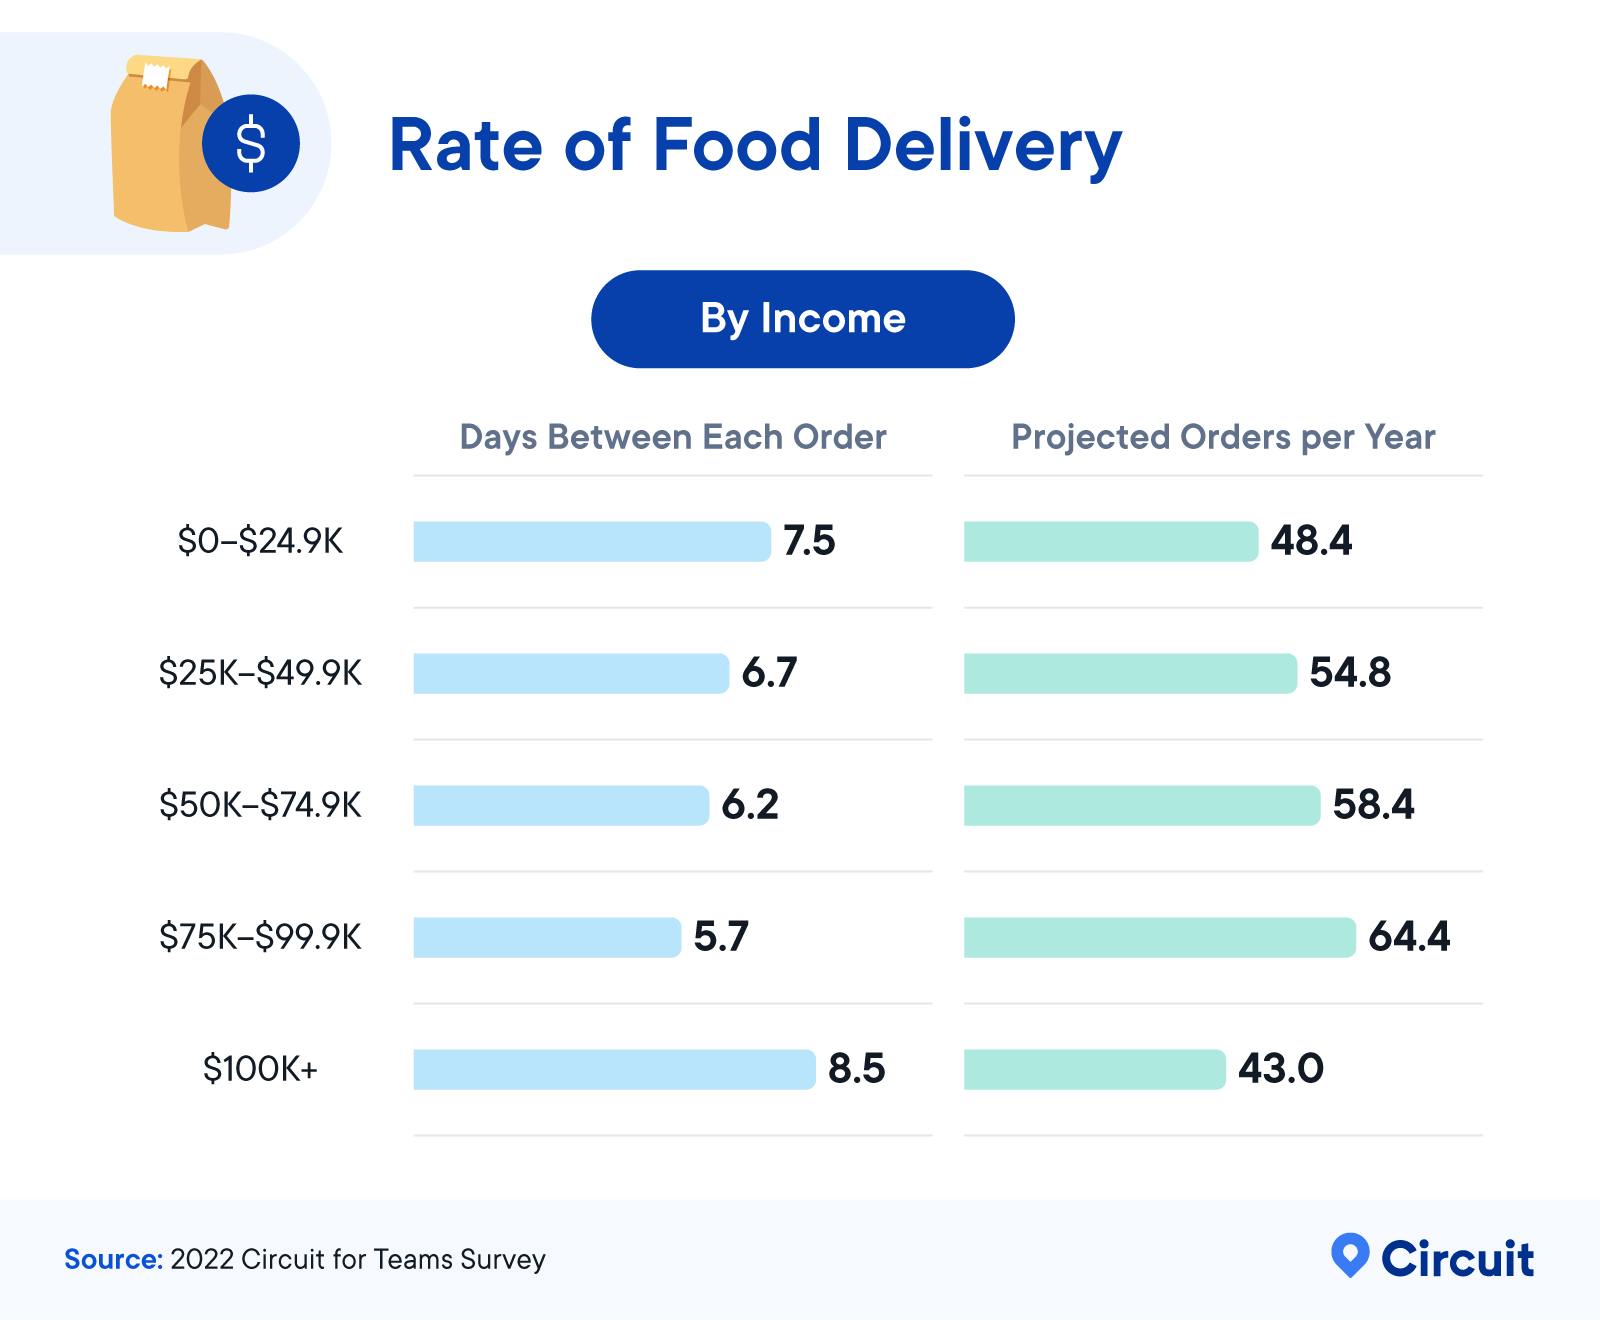 Rate of Food Delivery by Income